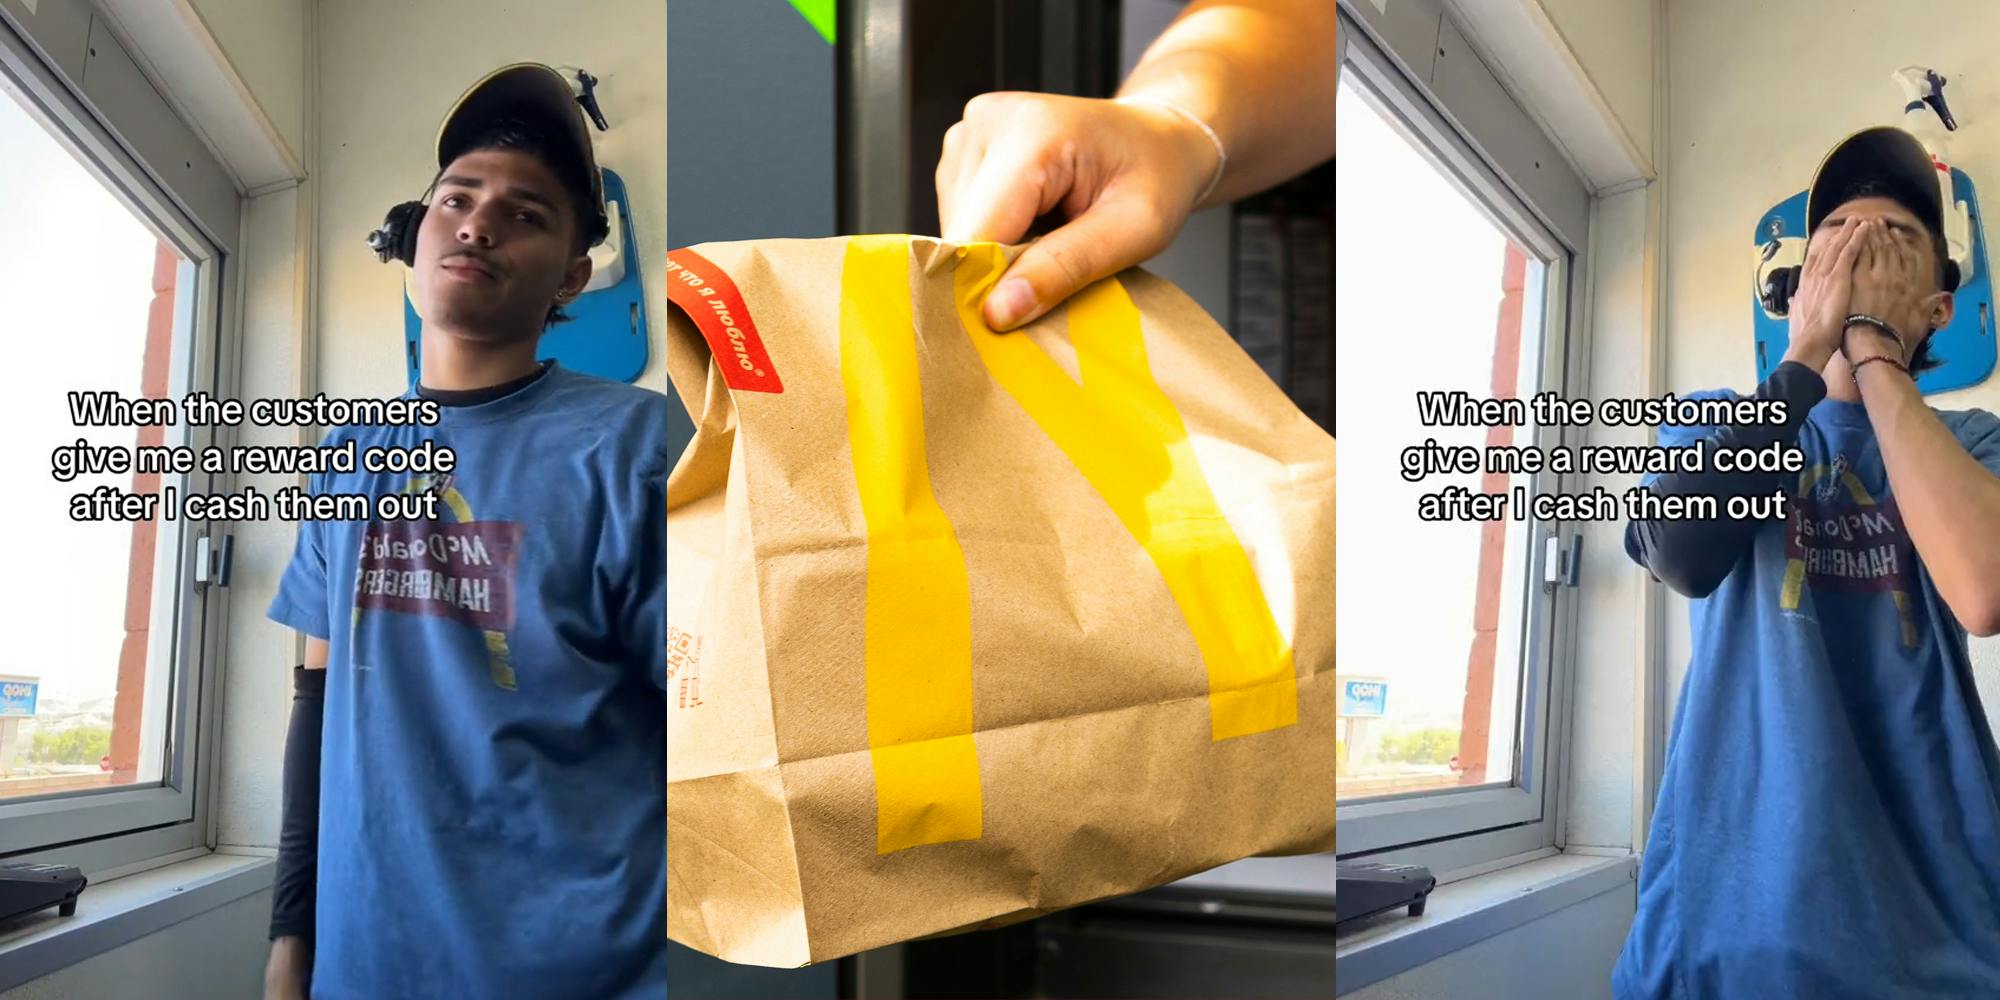 McDonald's worker with caption "When the customers give me a reward code after I cash them out" (l) McDonald's drive thru worker holding bag of food (c) McDonald's worker with caption "When the customers give me a reward code after I cash them out" (r)